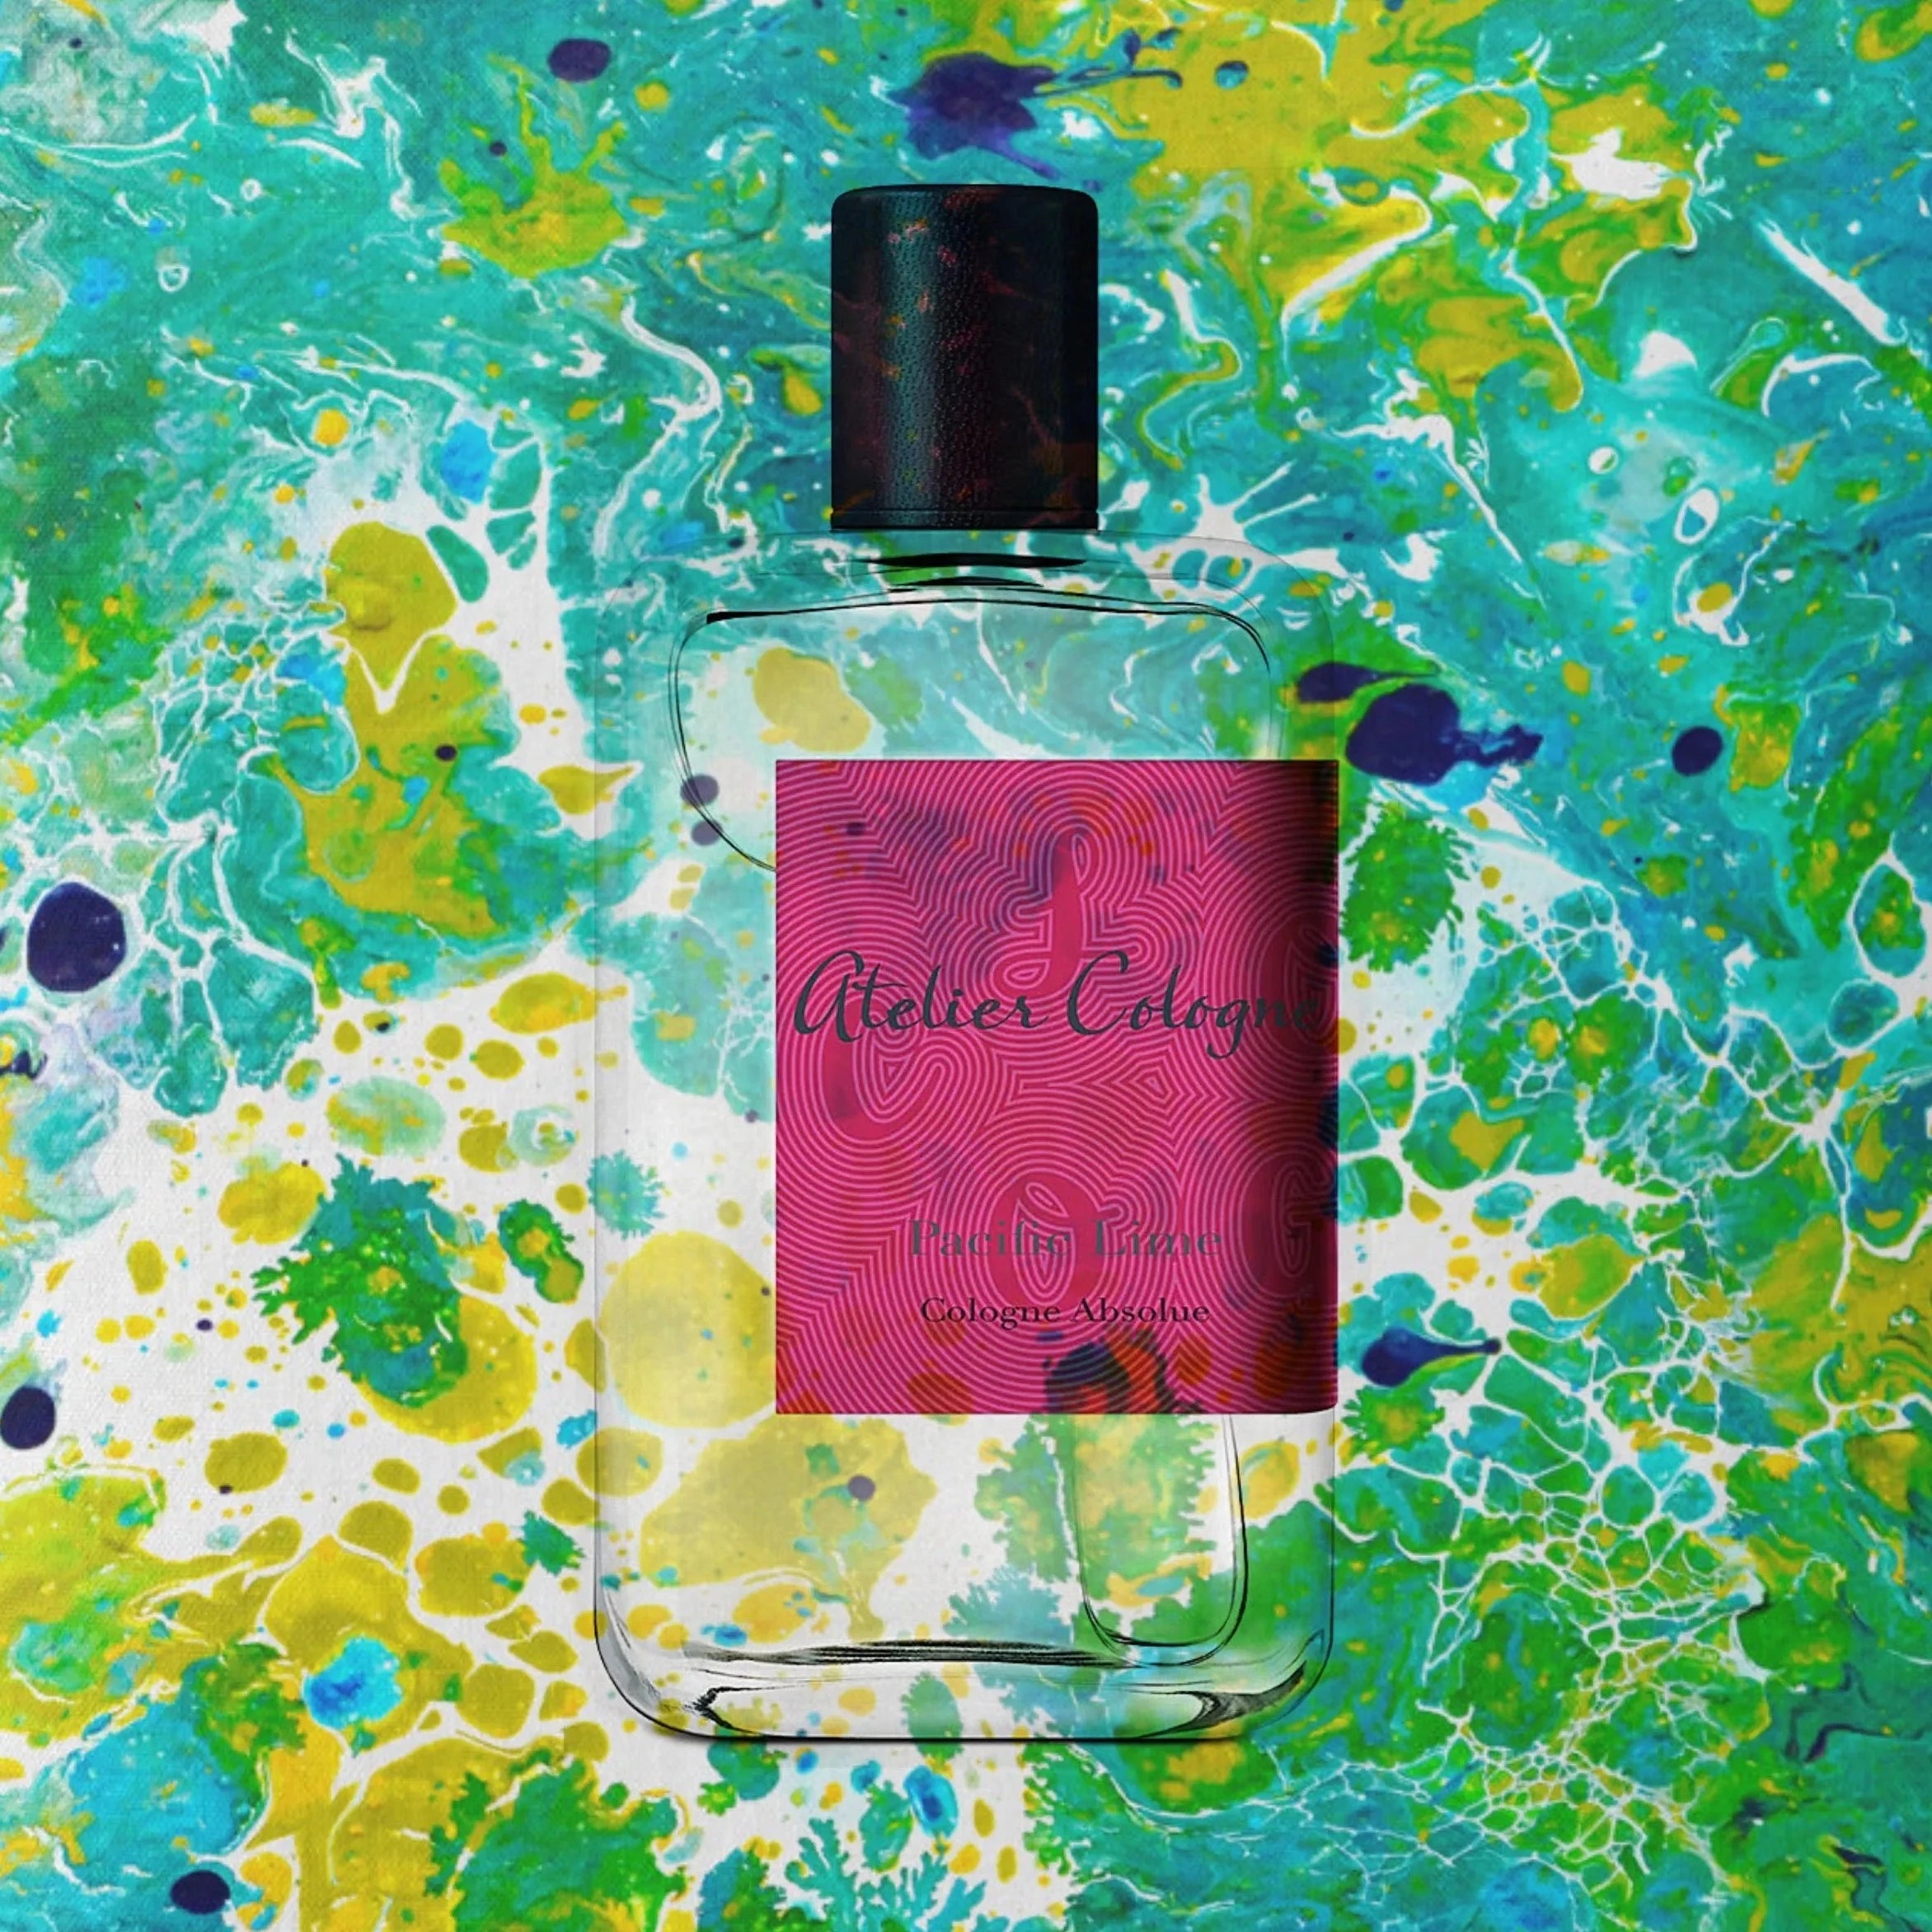 Atelier Cologne Pacific Lime Cologne Absolue | My Perfume Shop Australia